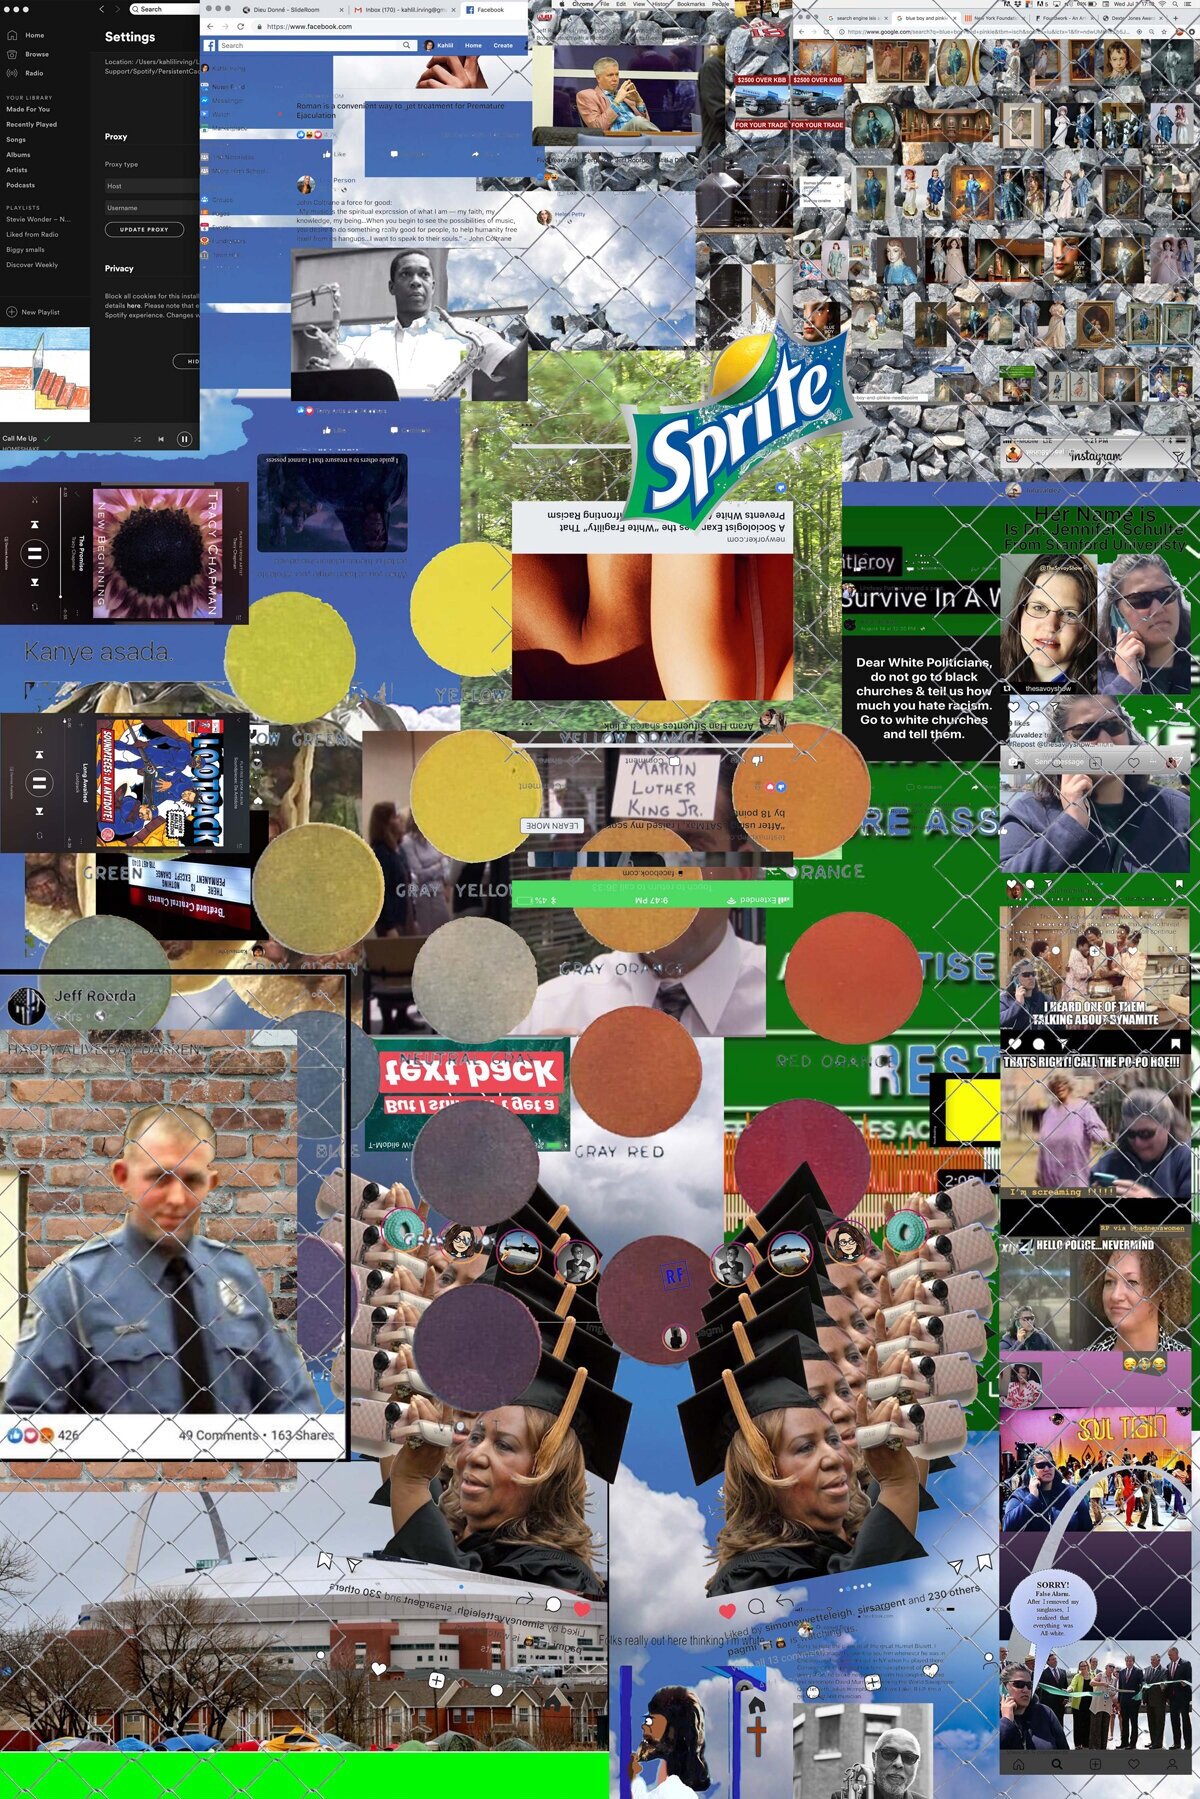   Music Memorial in Film  [(Greeting Screening Chained ) Daily Ritual &amp; tribute (TERROR)]   2019  15 x 10 inches  Digitally sourced and constructed collage 